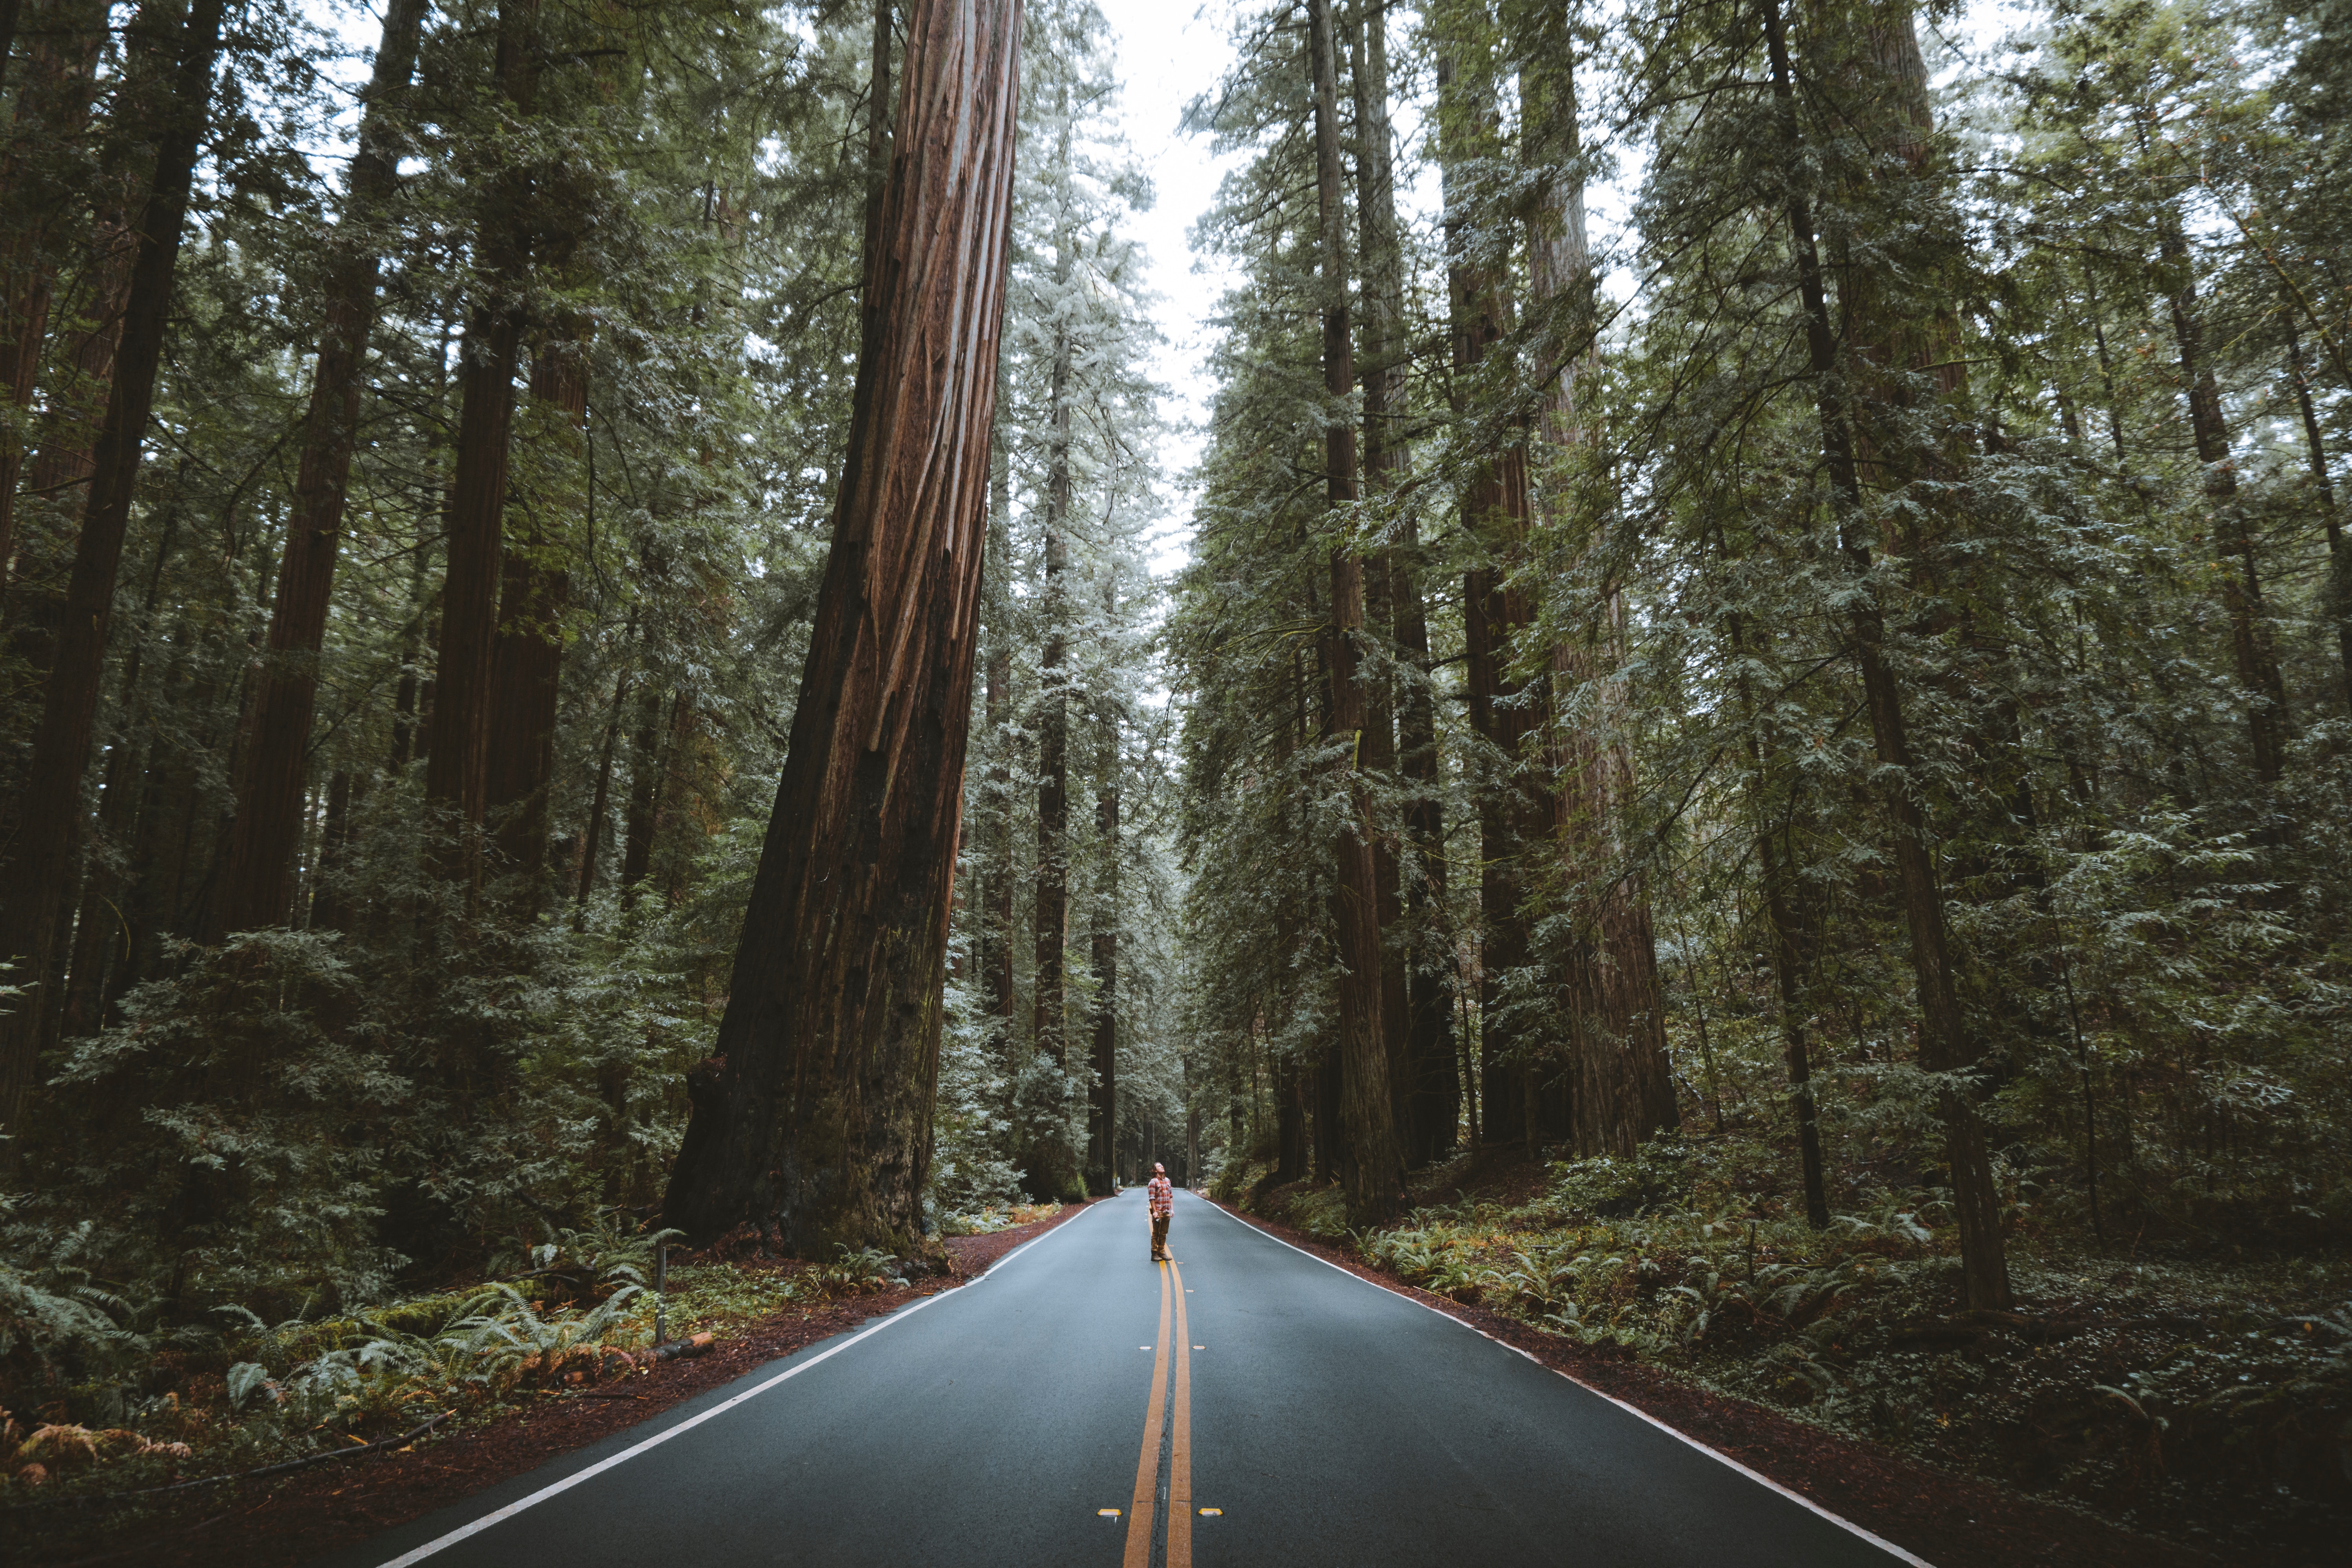 New Lock Screen Wallpapers nature, trees, road, forest, asphalt, human, person